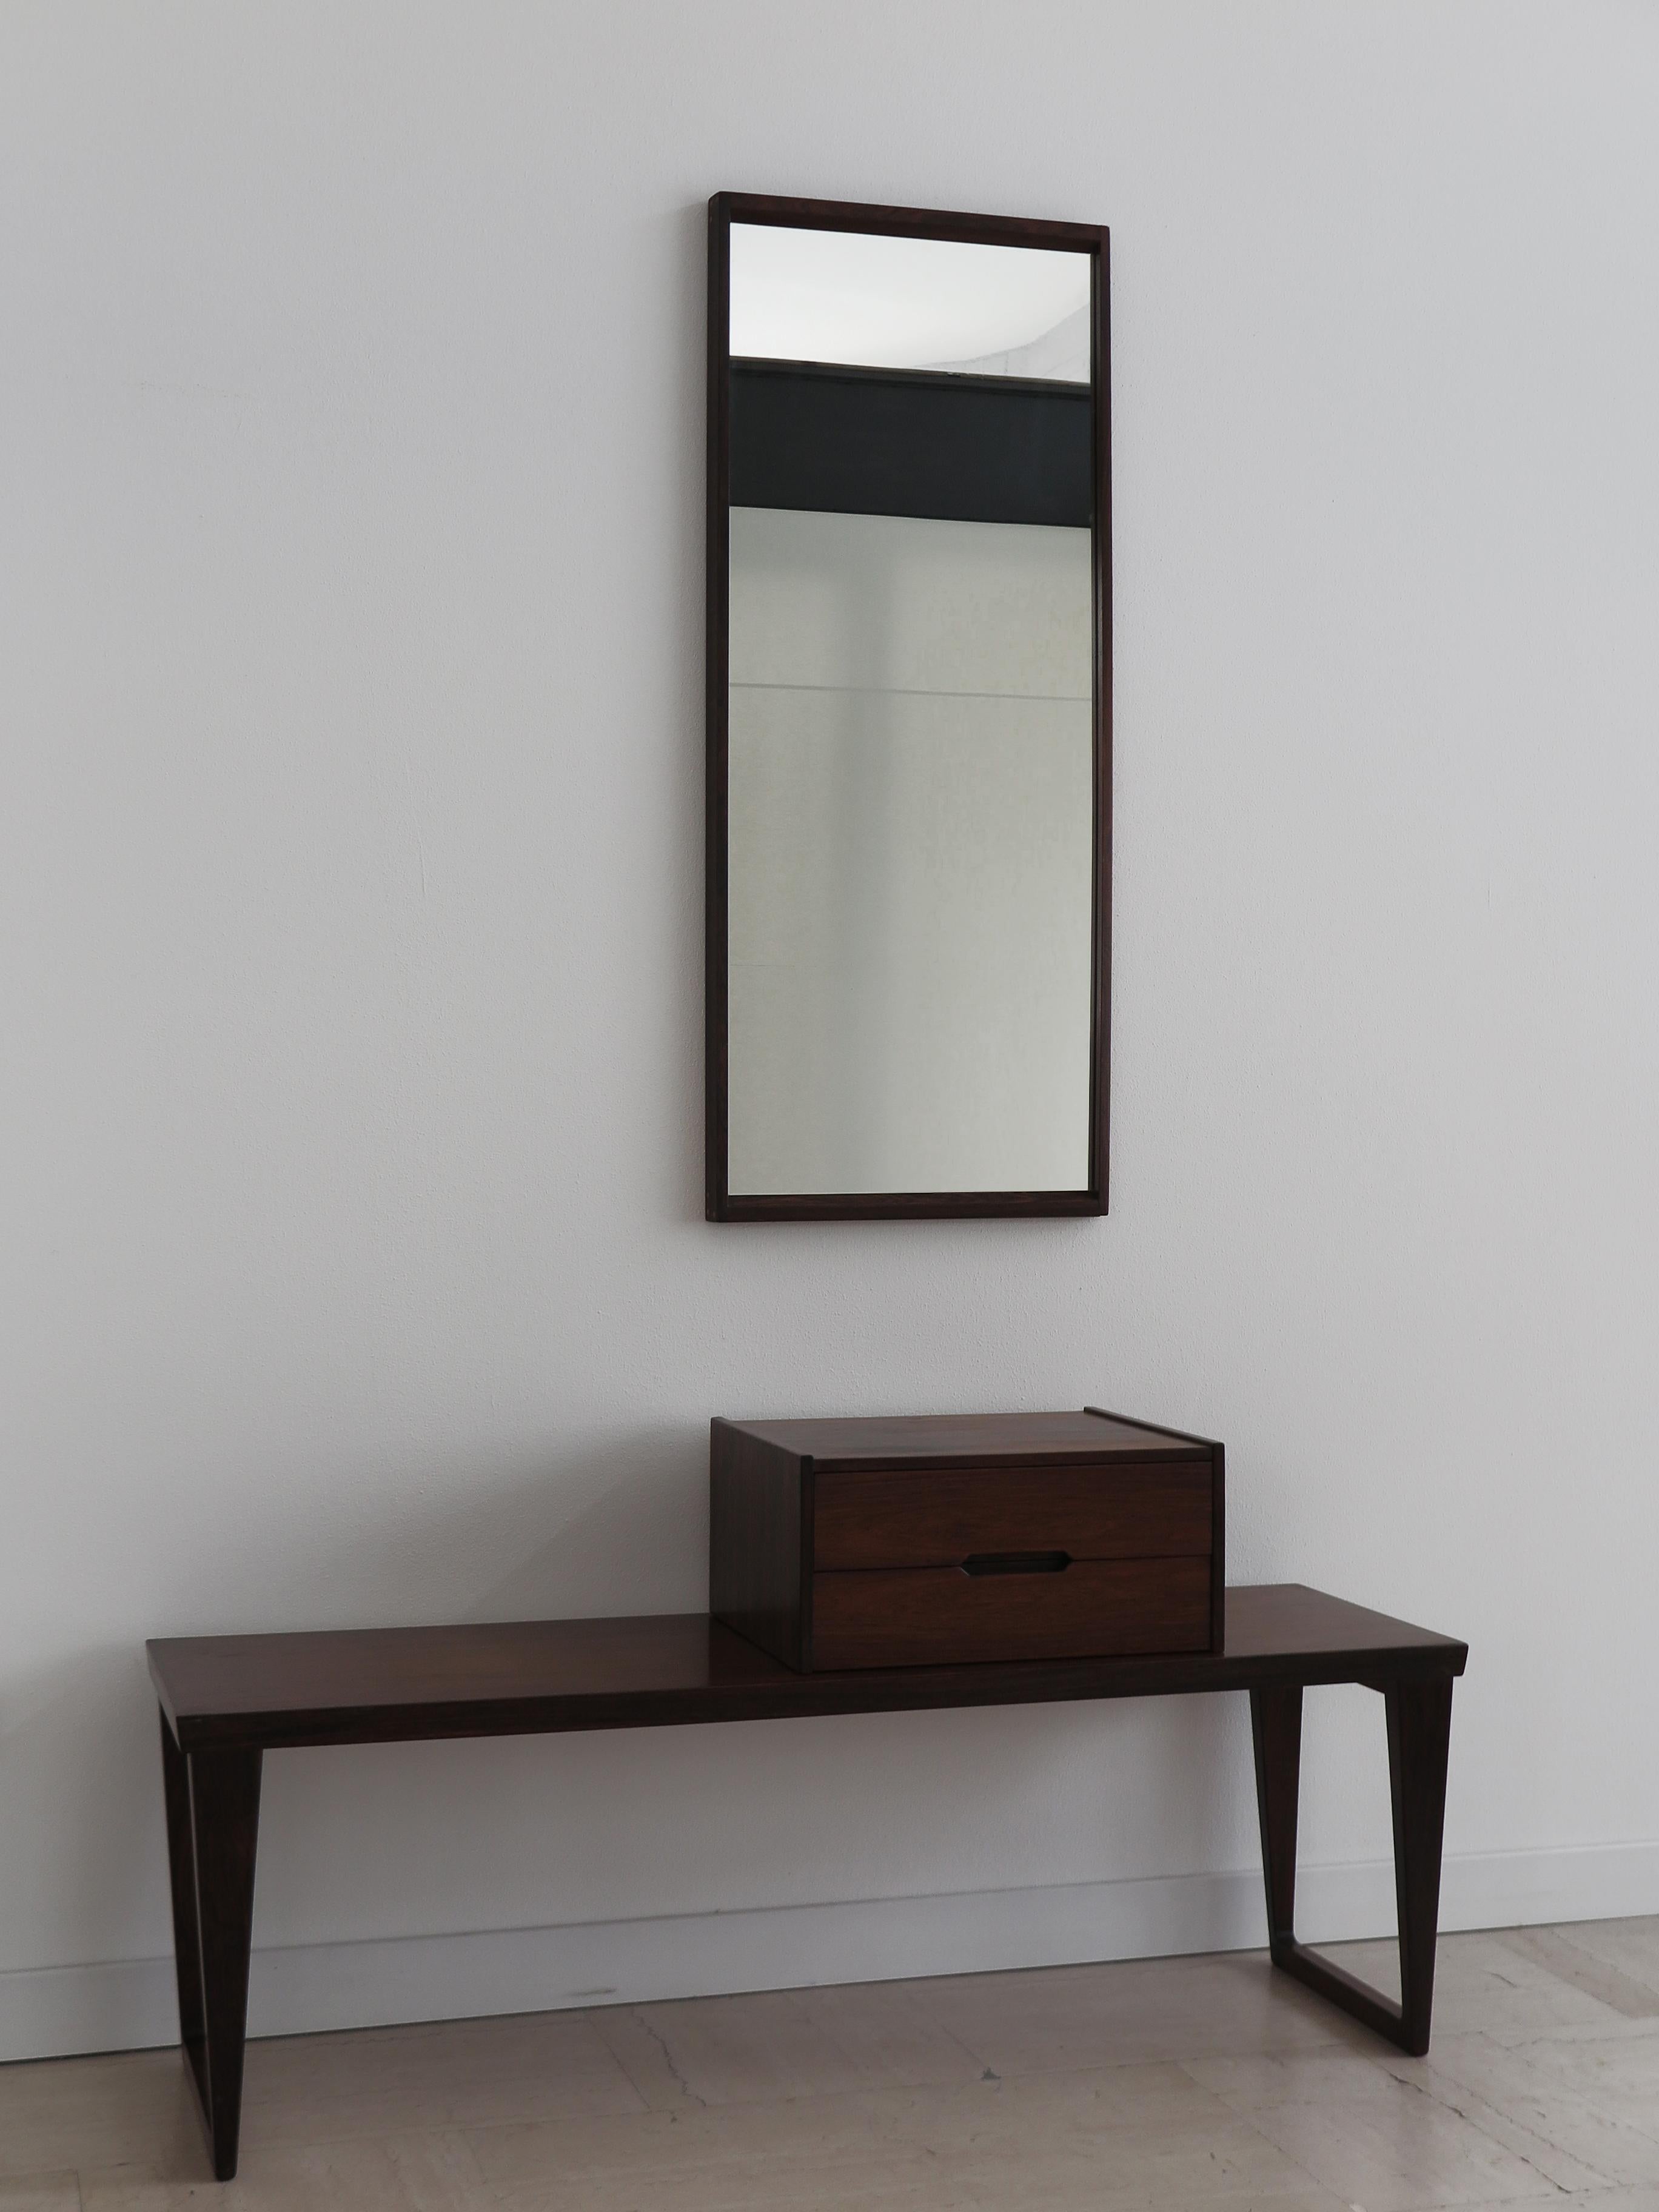 Scandinavian, vintage modern antique set for hallway or bedroom consisting of movable chest of drawers, coffee table and mirror in dark wood designed by Kai Kristiansen and produced by Aksel Kjersgaard, with mark printed on back of chest of drawers